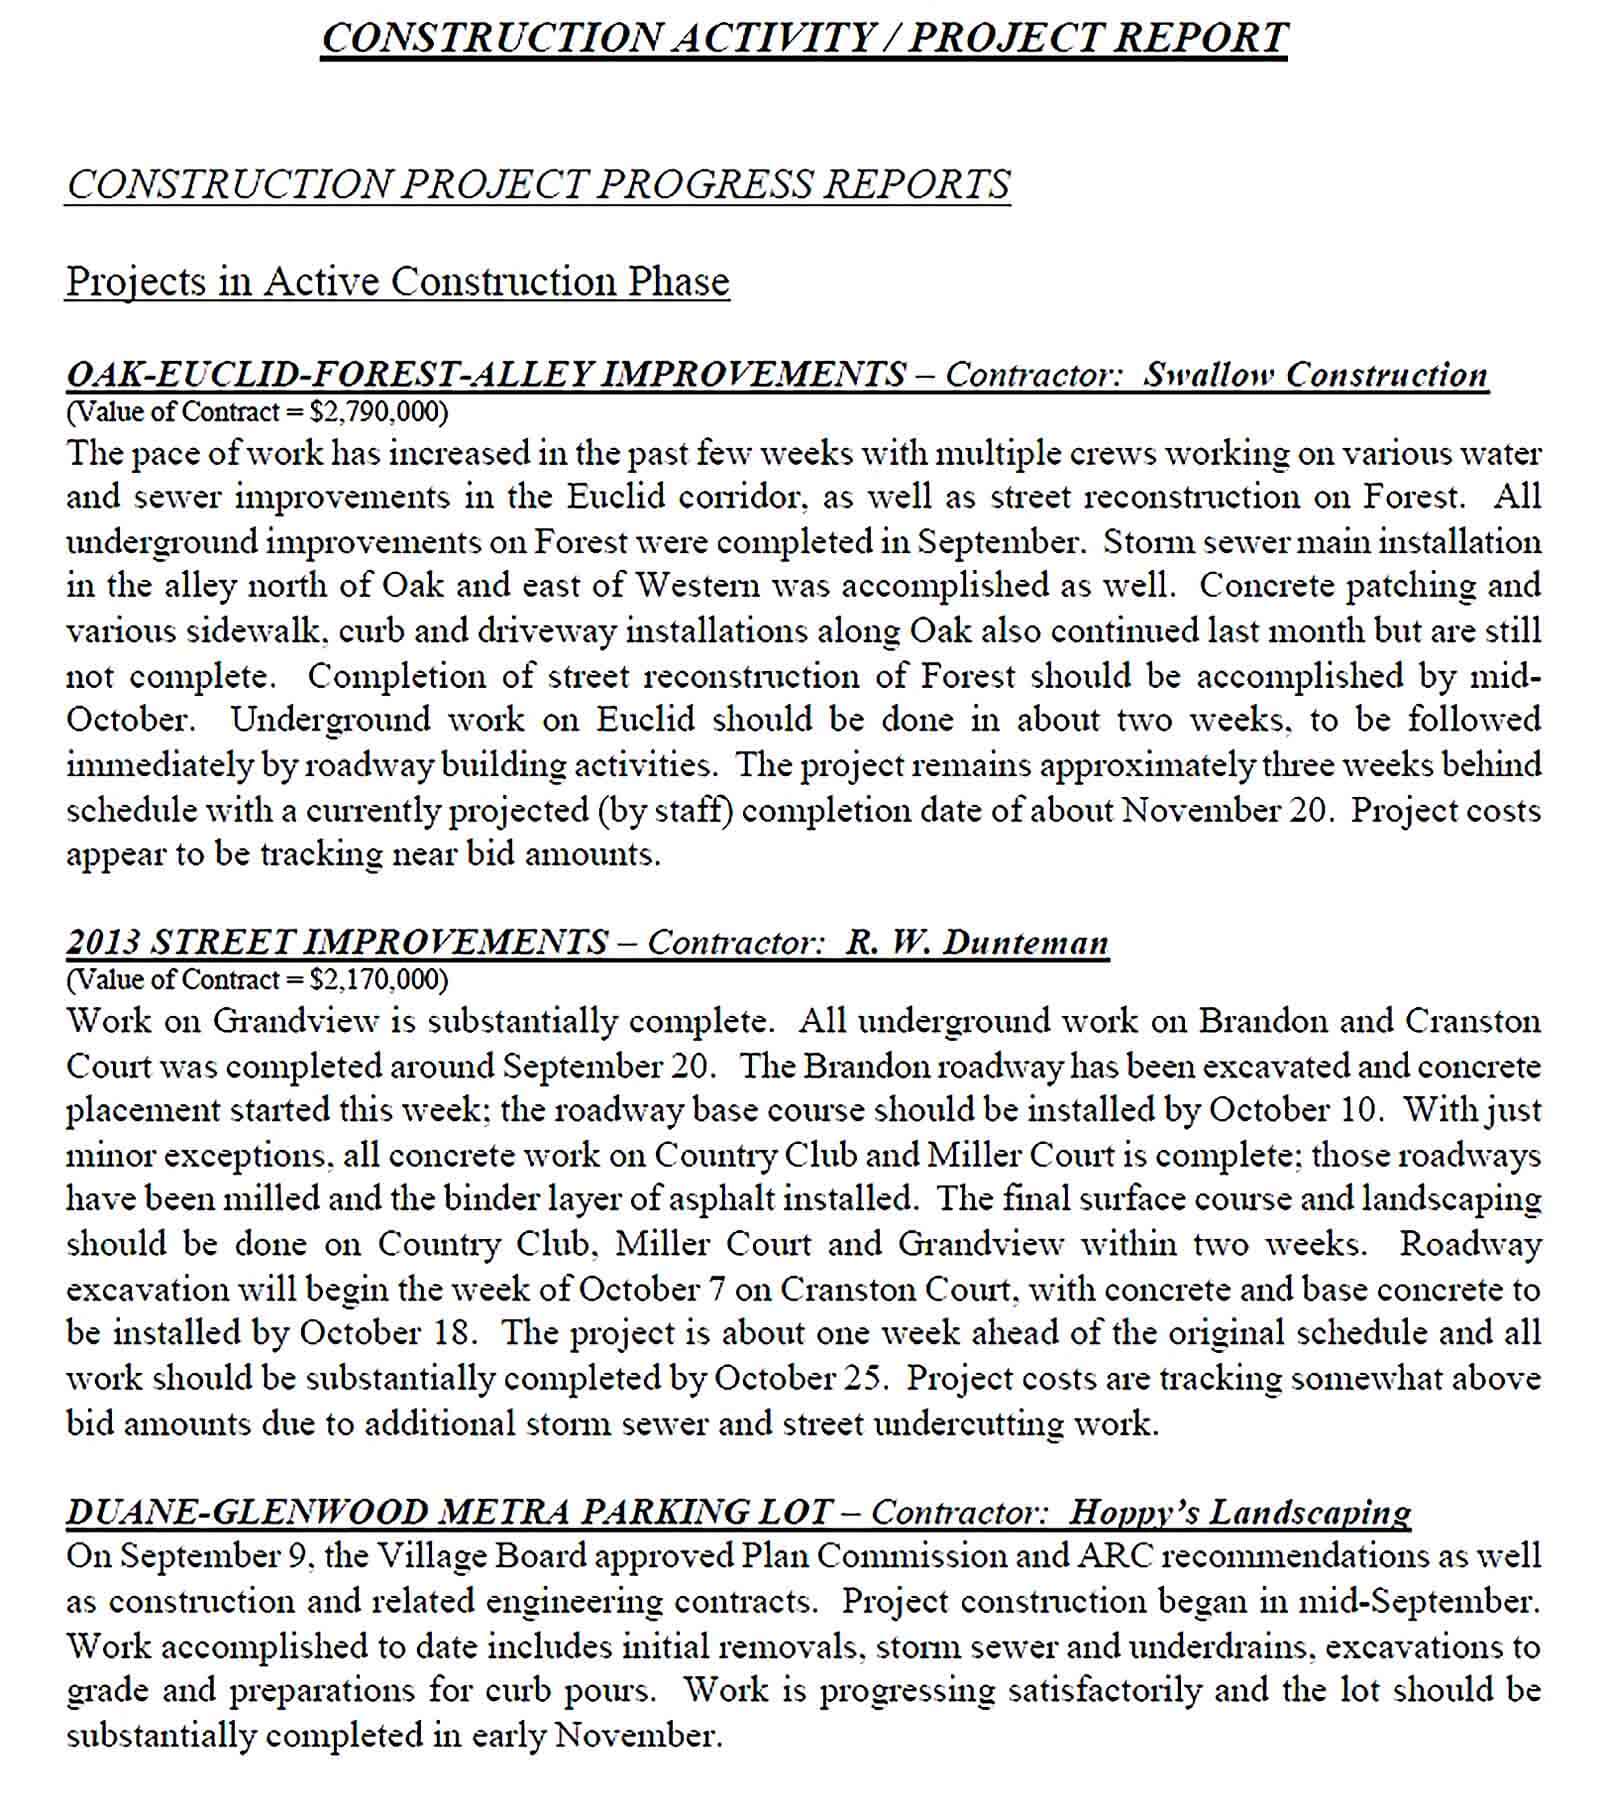 Sample Construction Activity Project Report Template